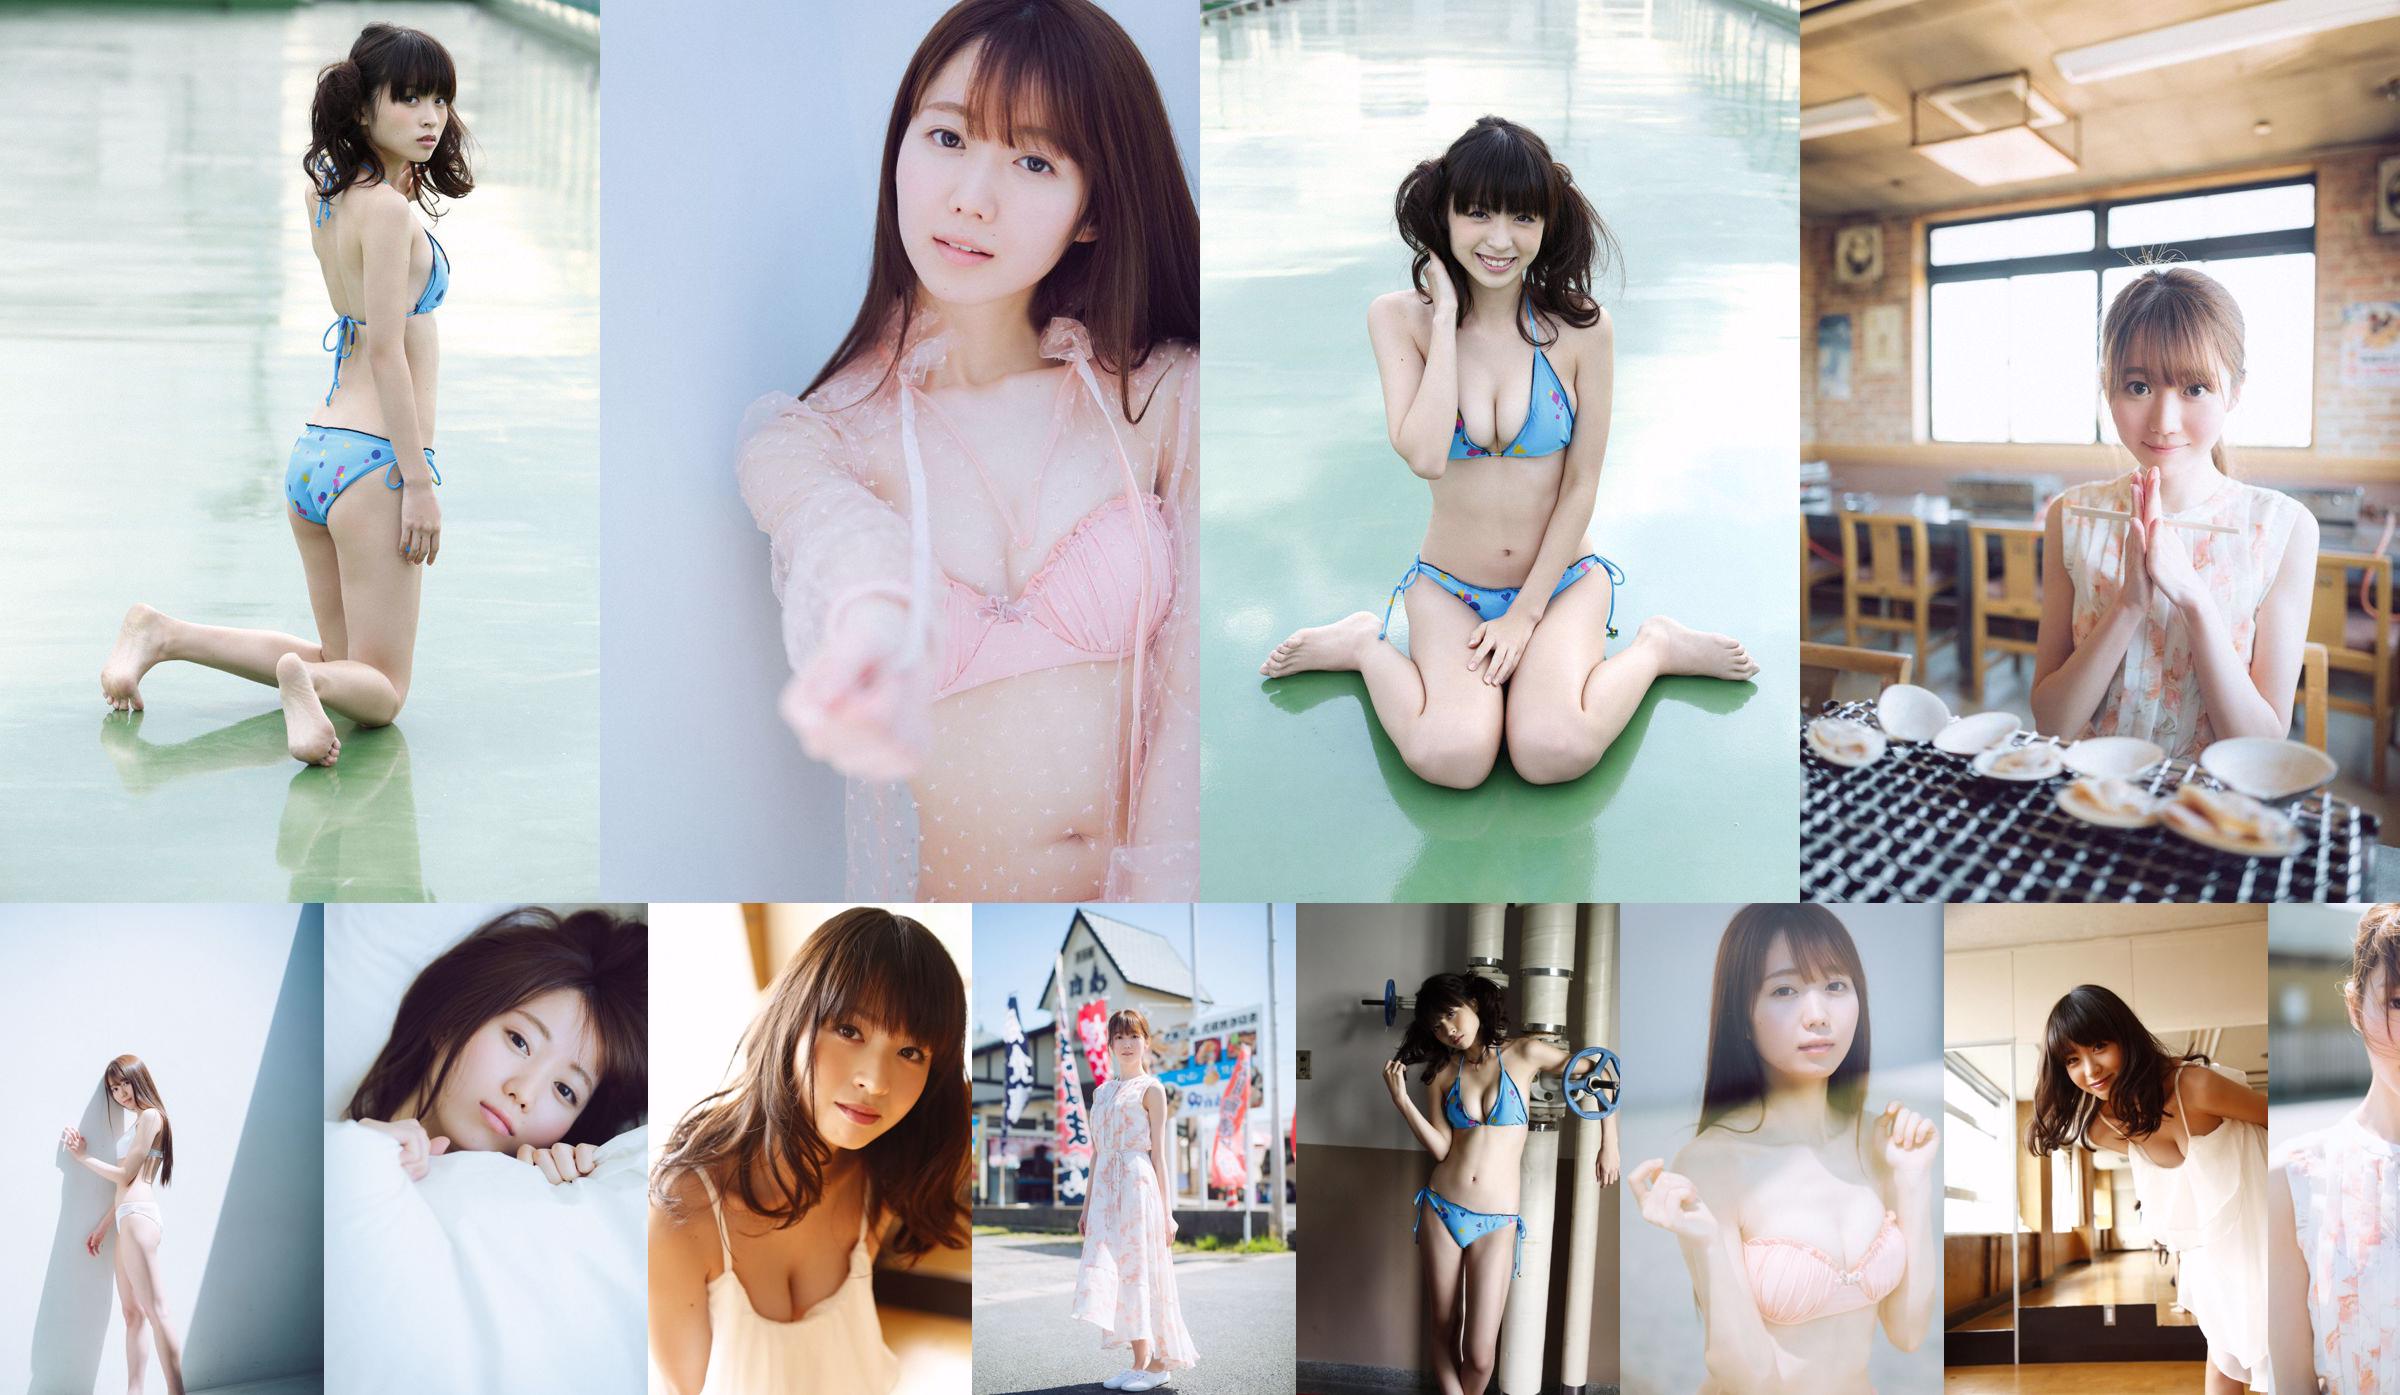 Emiri Otani "With you and two." [WPB-net] Extra734 No.fdf9a3 Page 3